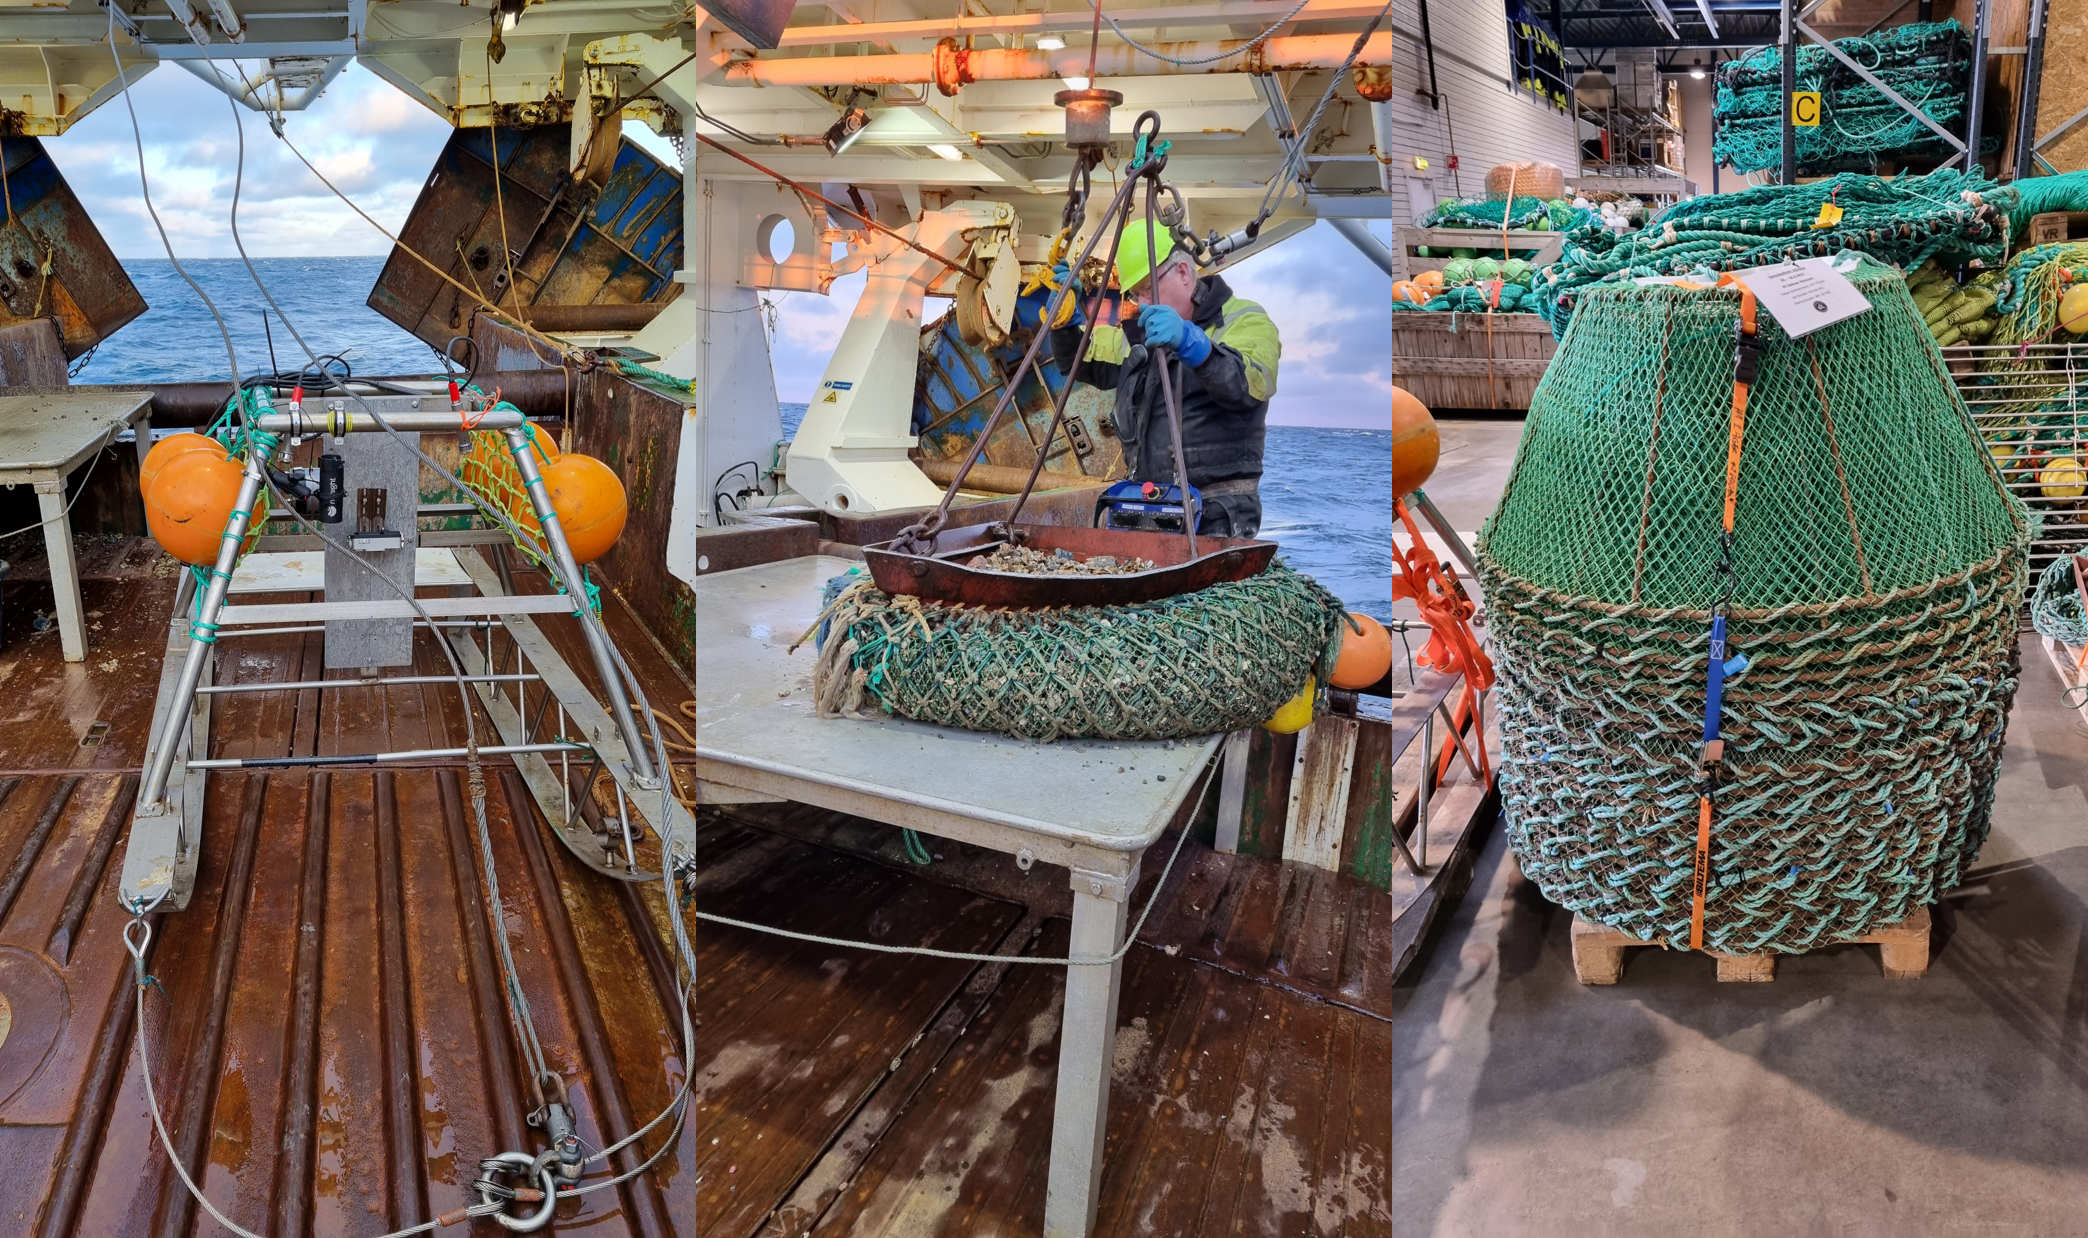 Survey gear used during survey 2022839: video sledge (left), delta dredge (middle) and conical snow crab pots (right).